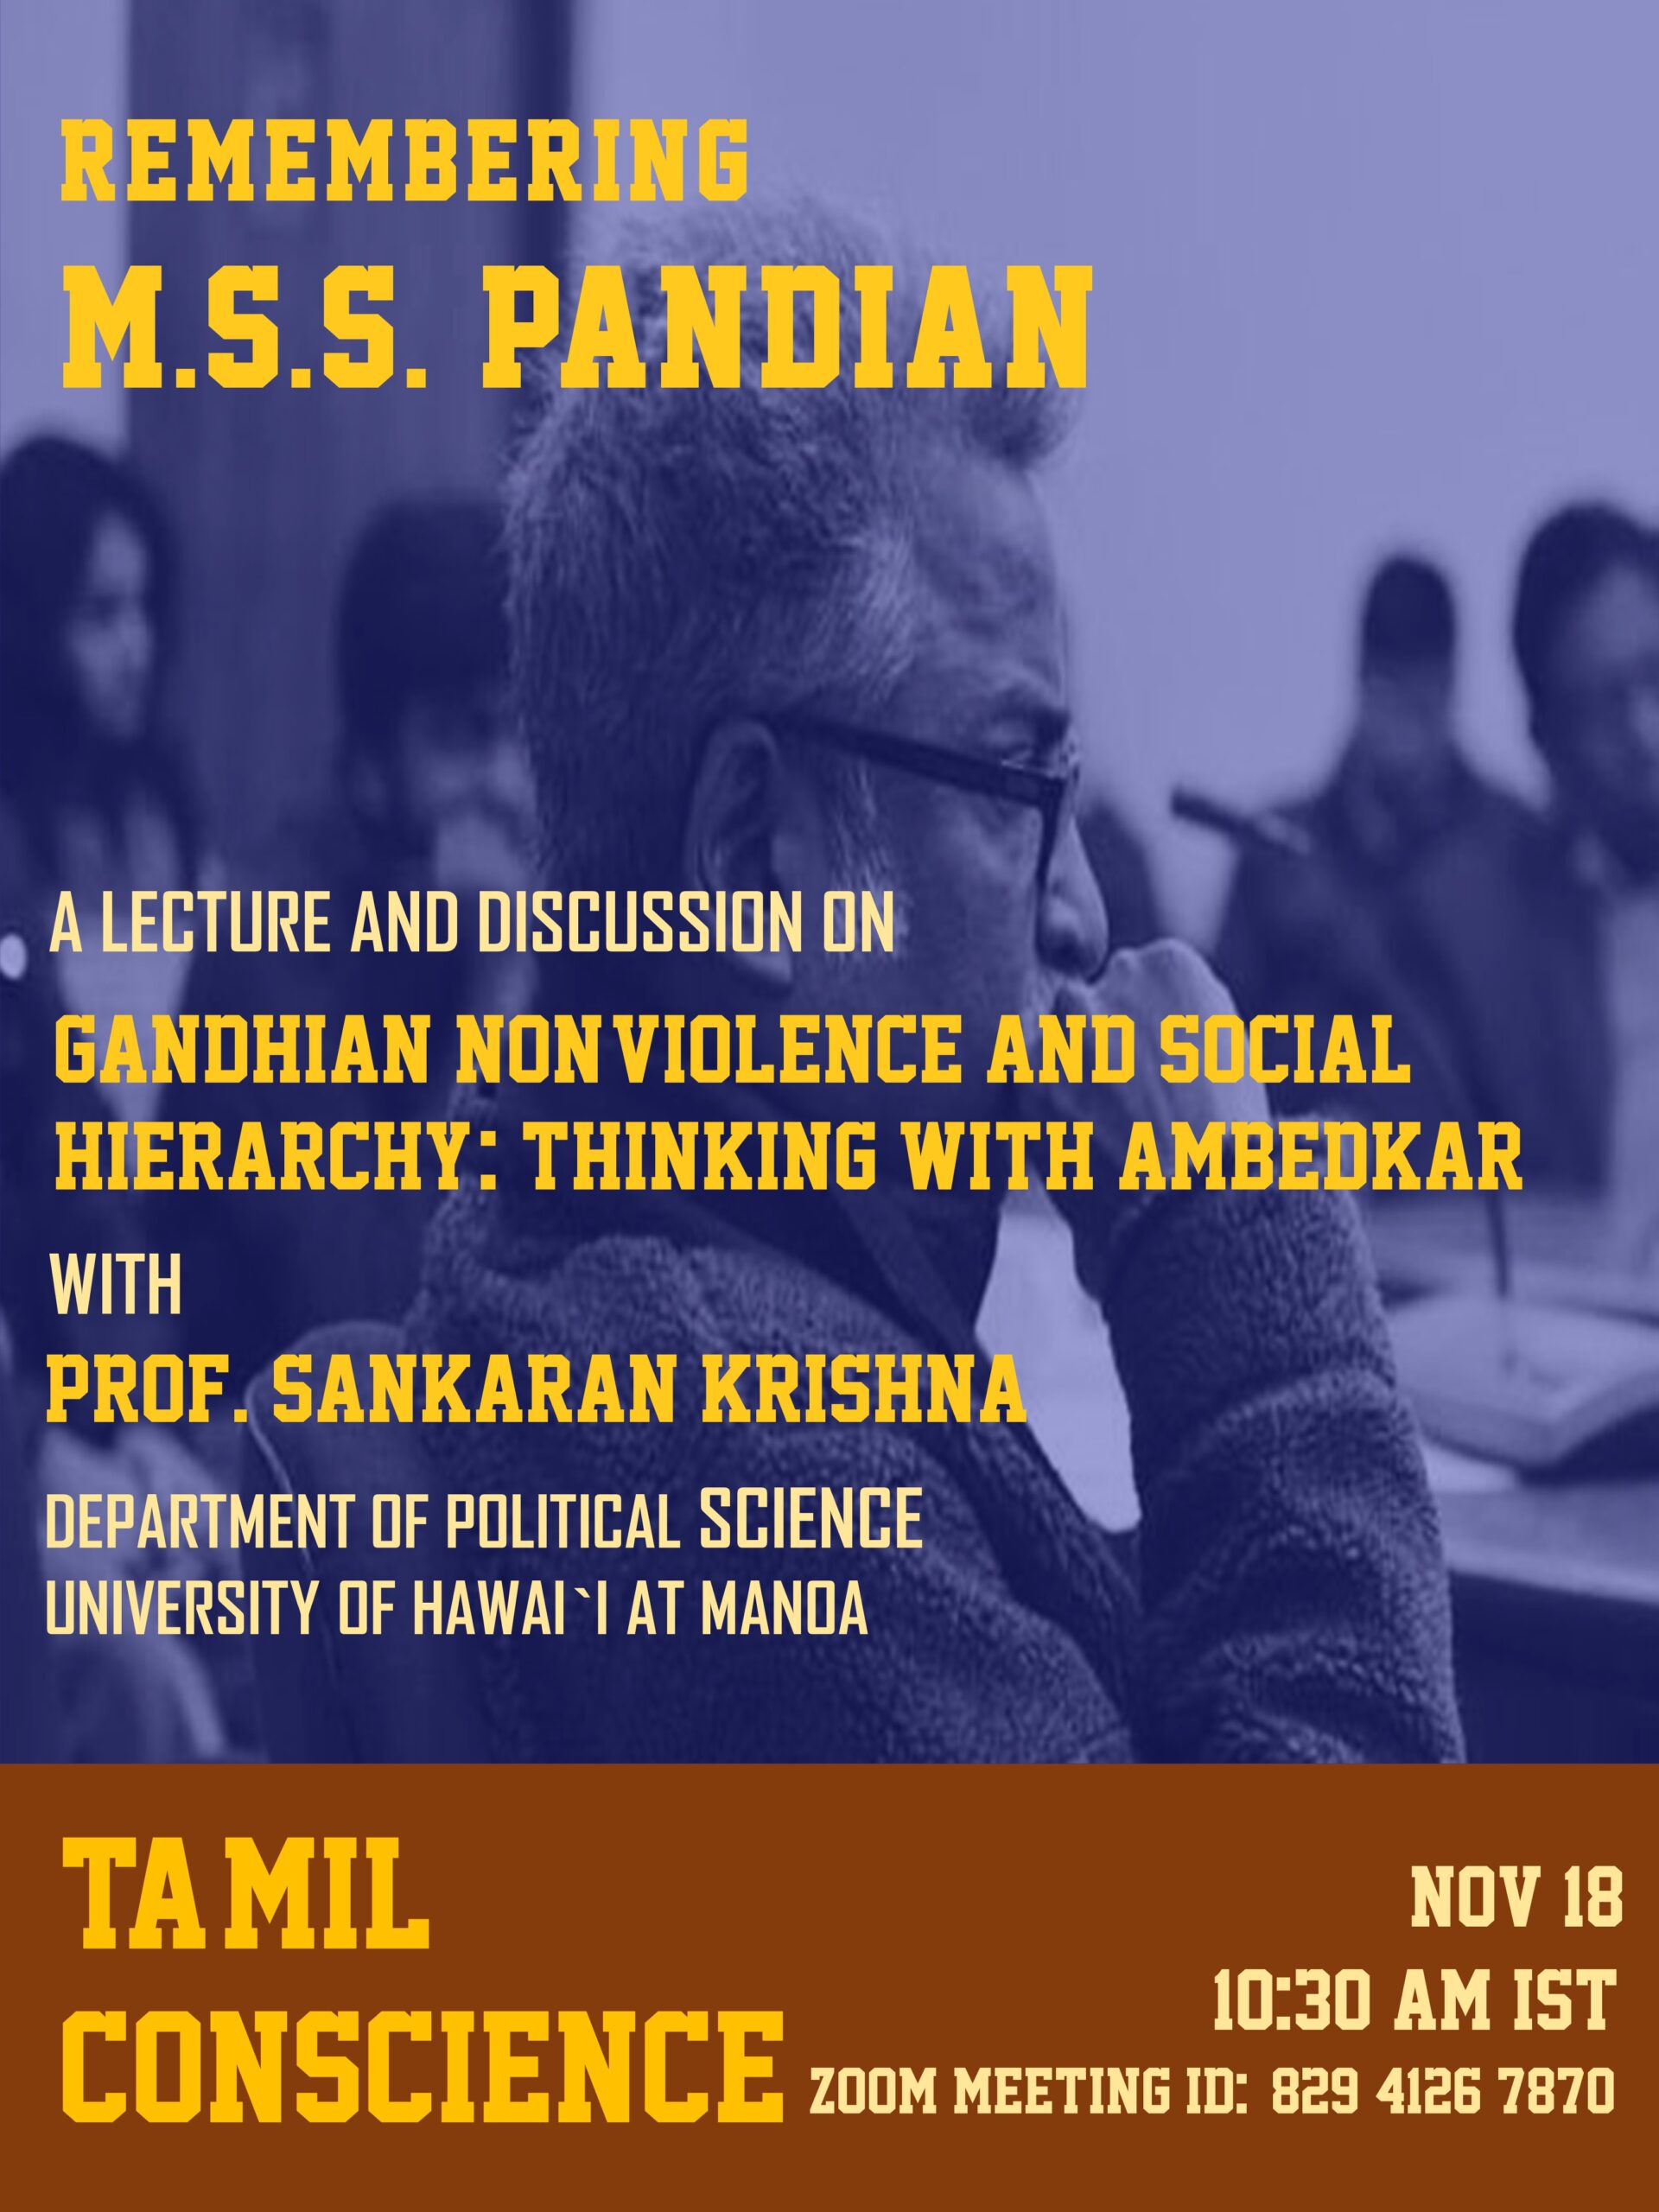 A lecture and discussion in remembrance of  Prof. M.S.S. Pandian delivered by Prof. Sankaran Krishna